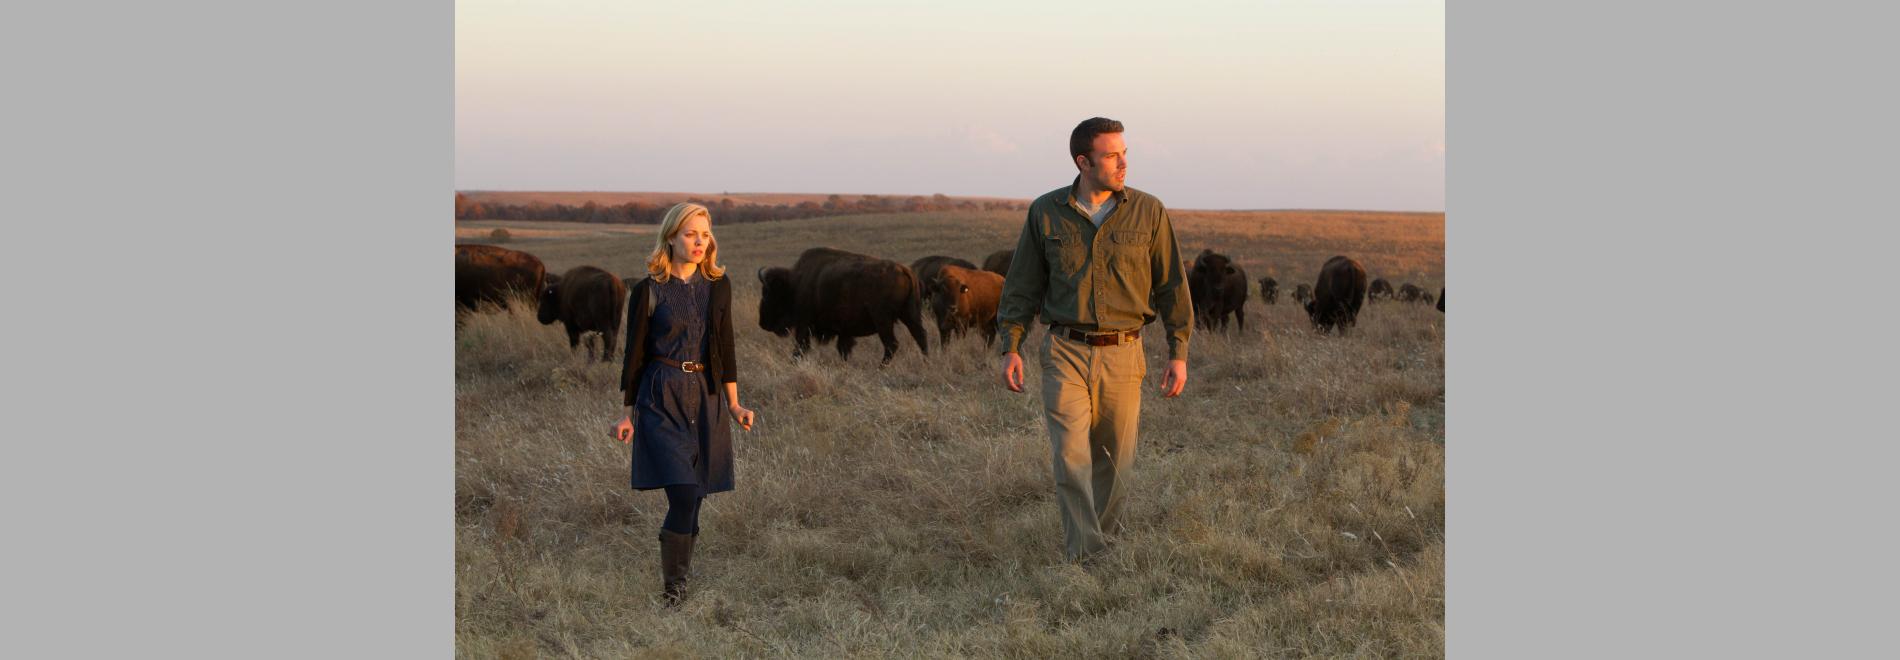 To the Wonder (Terrence Malick, 2012)